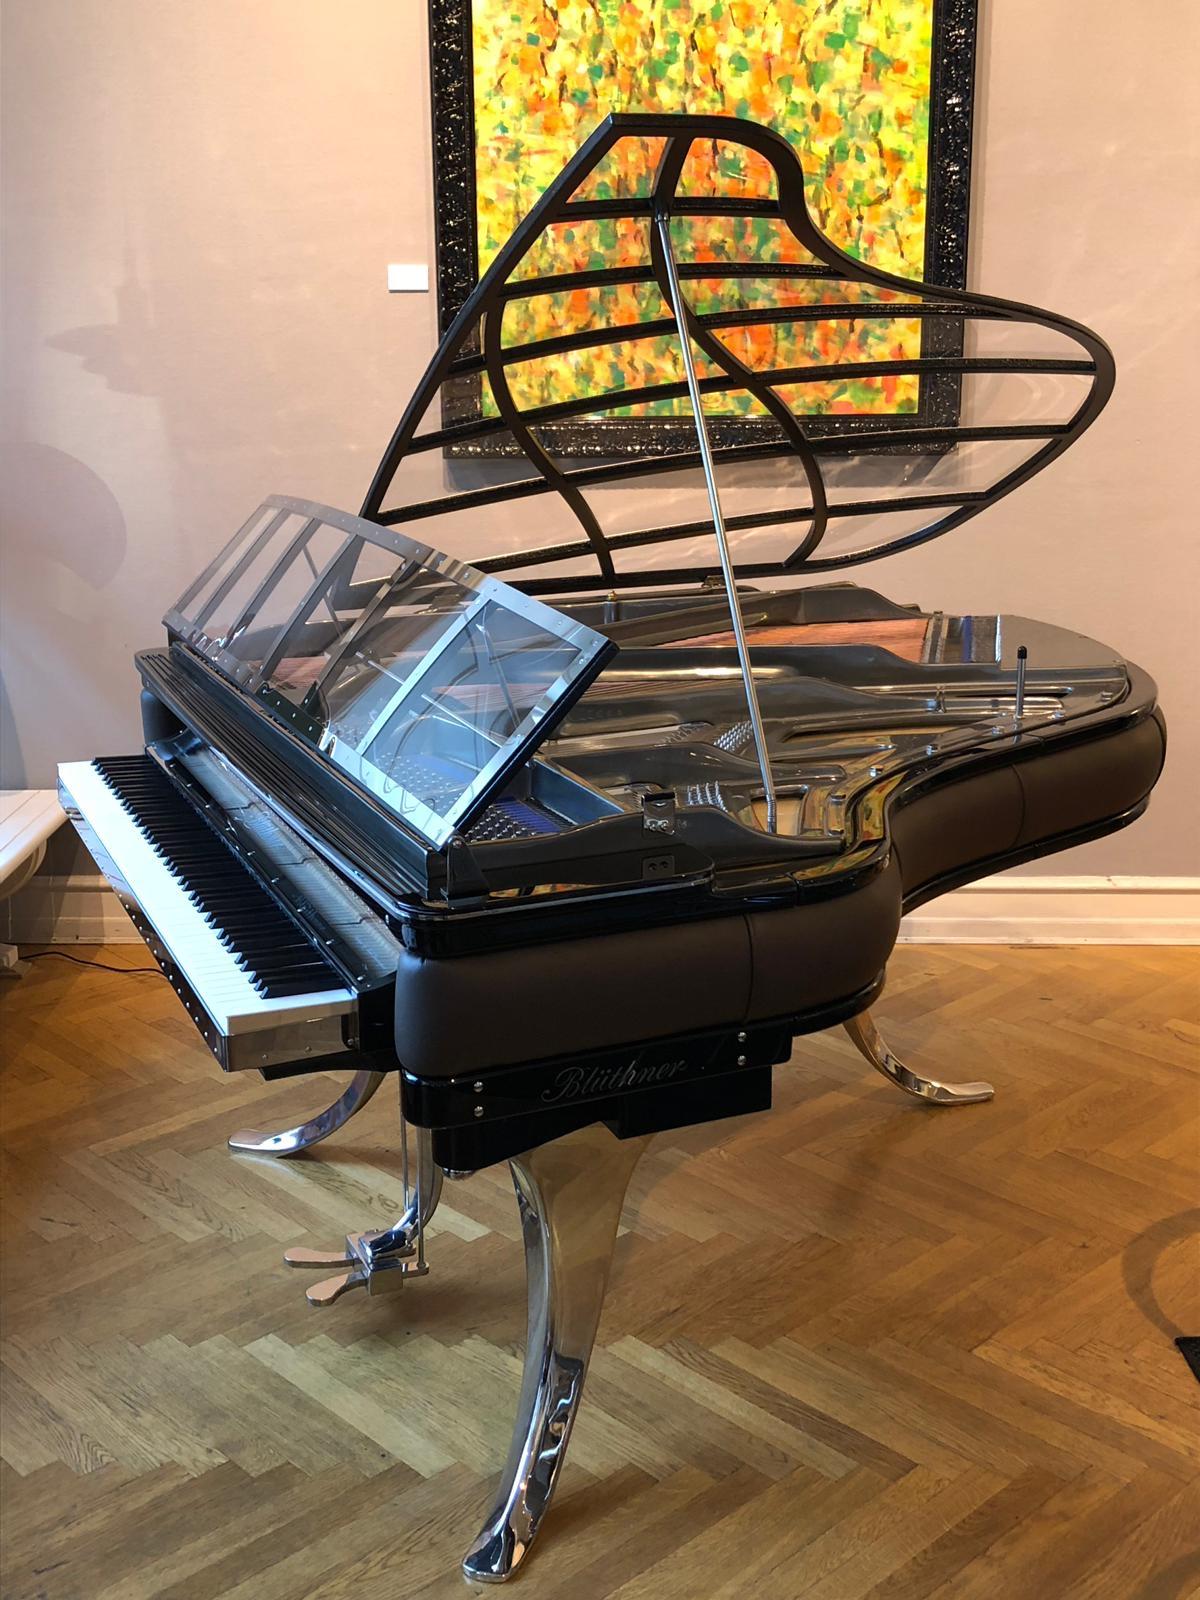 - All prices are listed ex works.
- 5 year guarantee.
- We regularly crate, ship and install PH Pianos worldwide with full insurance. Please contact us for individual shipping quote and for any questions.

Based on Poul Henningsen’s iconic PH